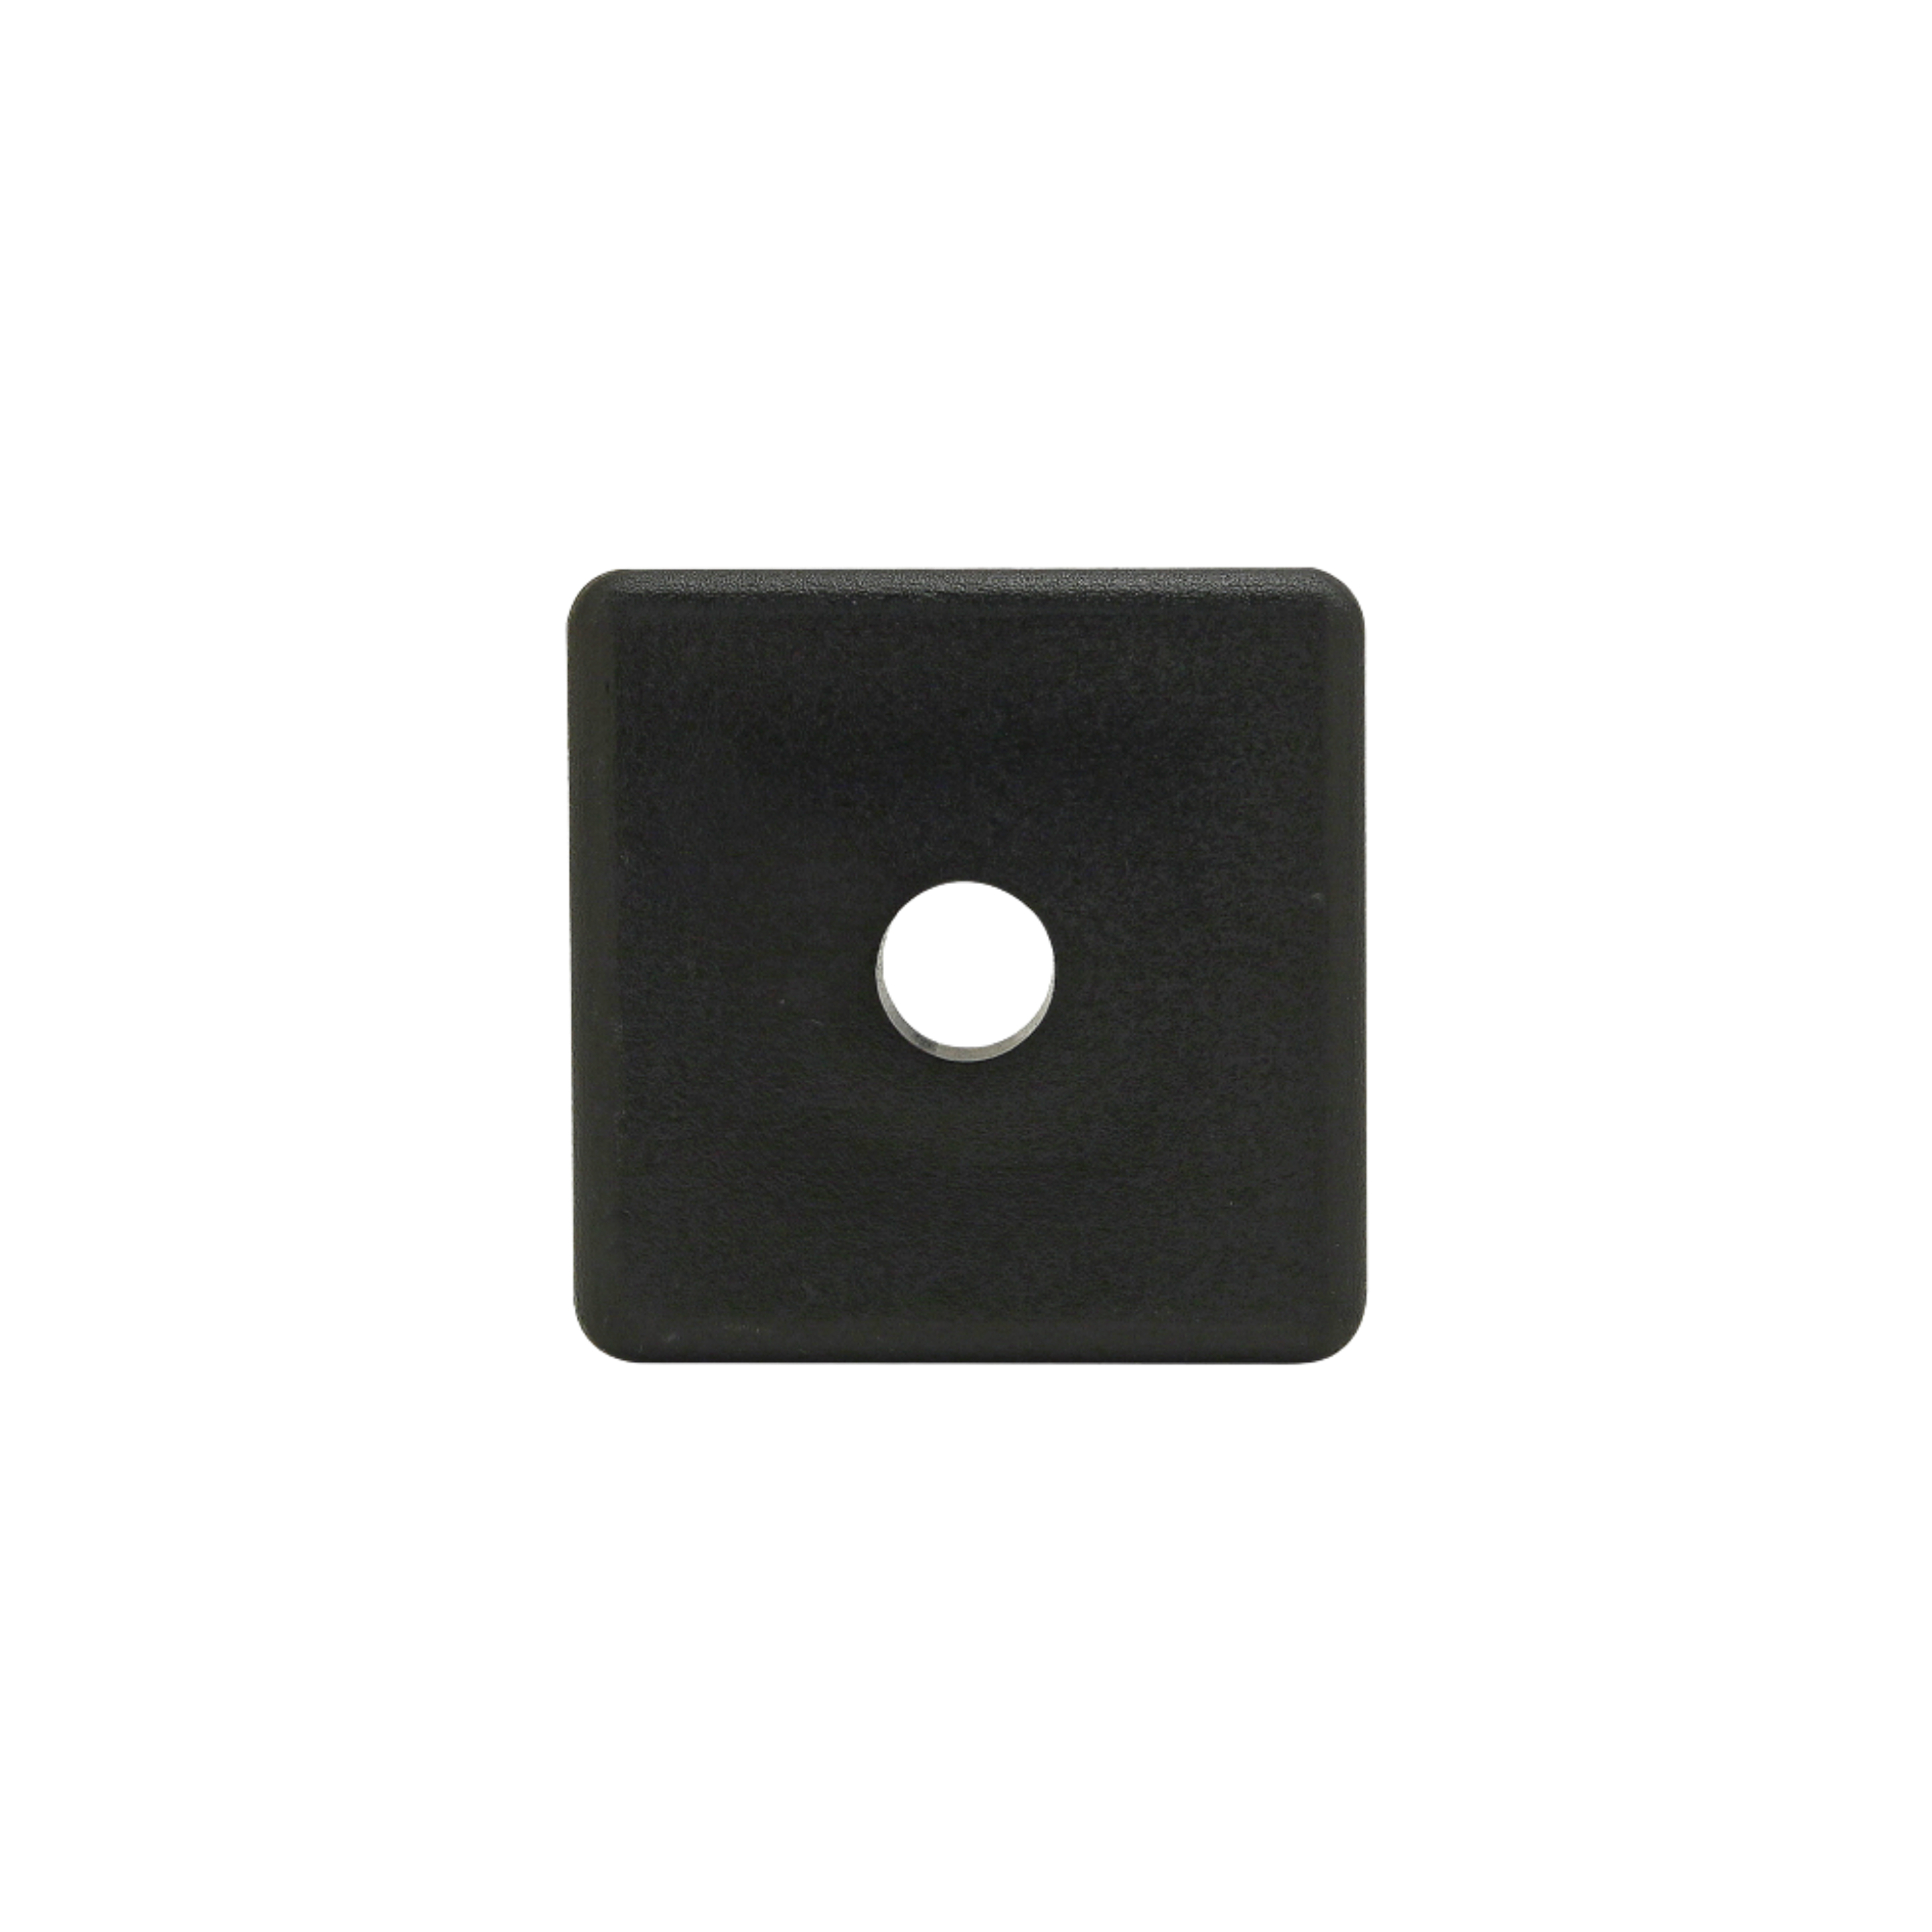 black square end cap with one hole in the center